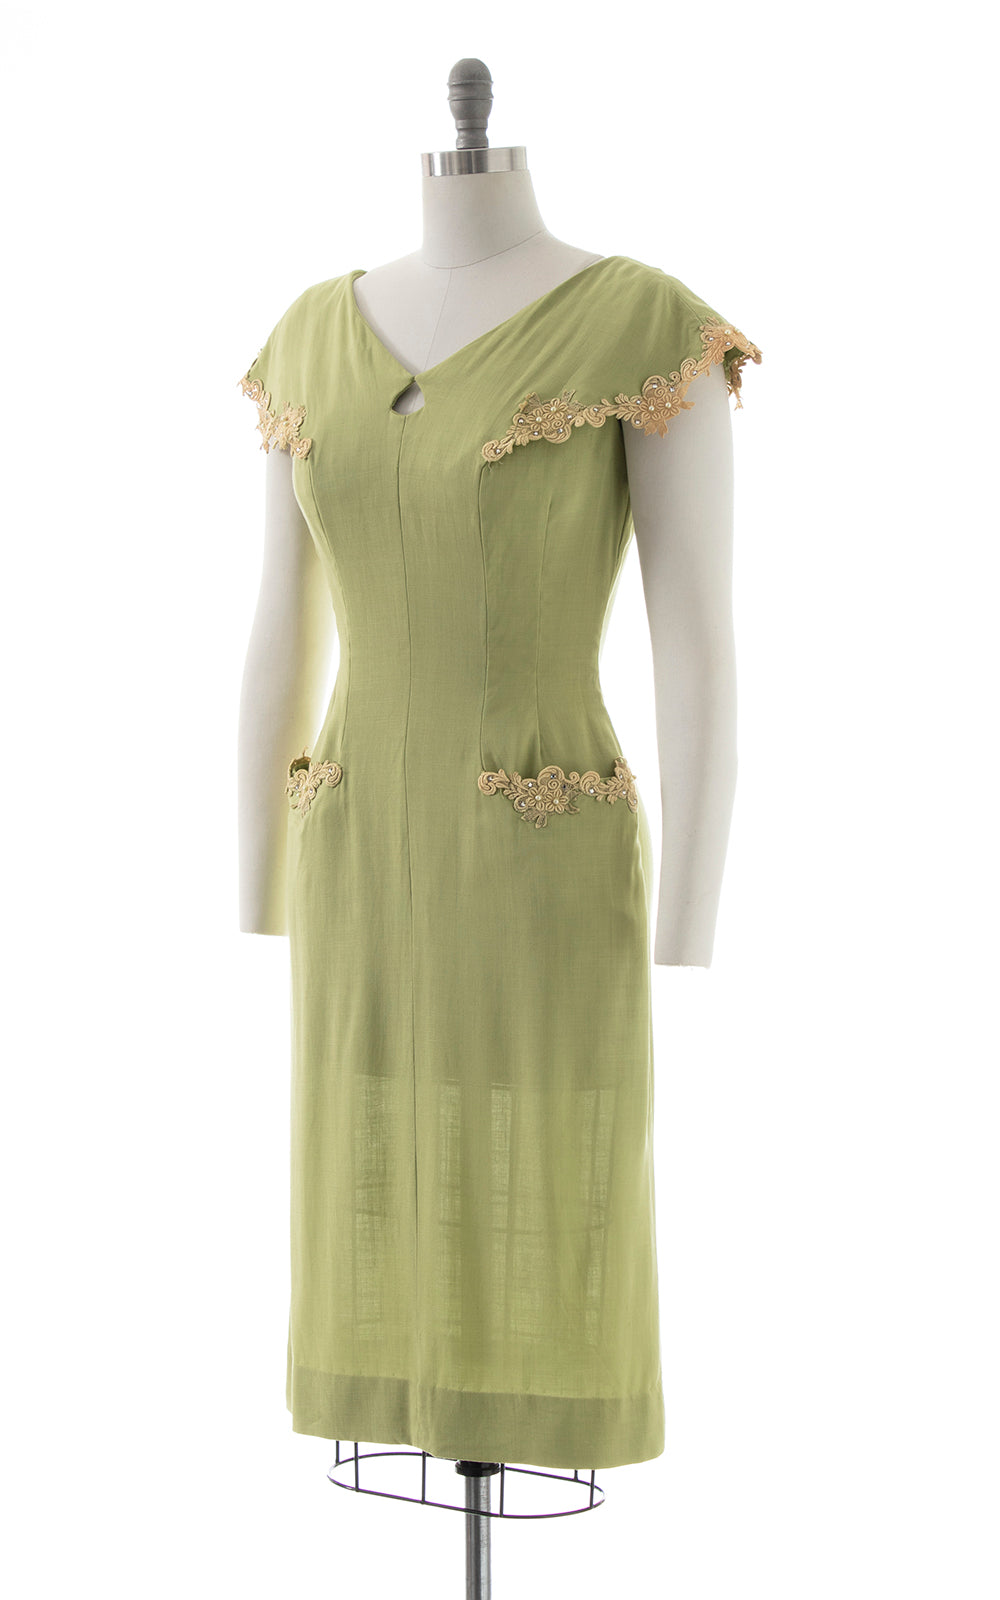 1950s Linen & Lace Dress with Pockets | small/medium